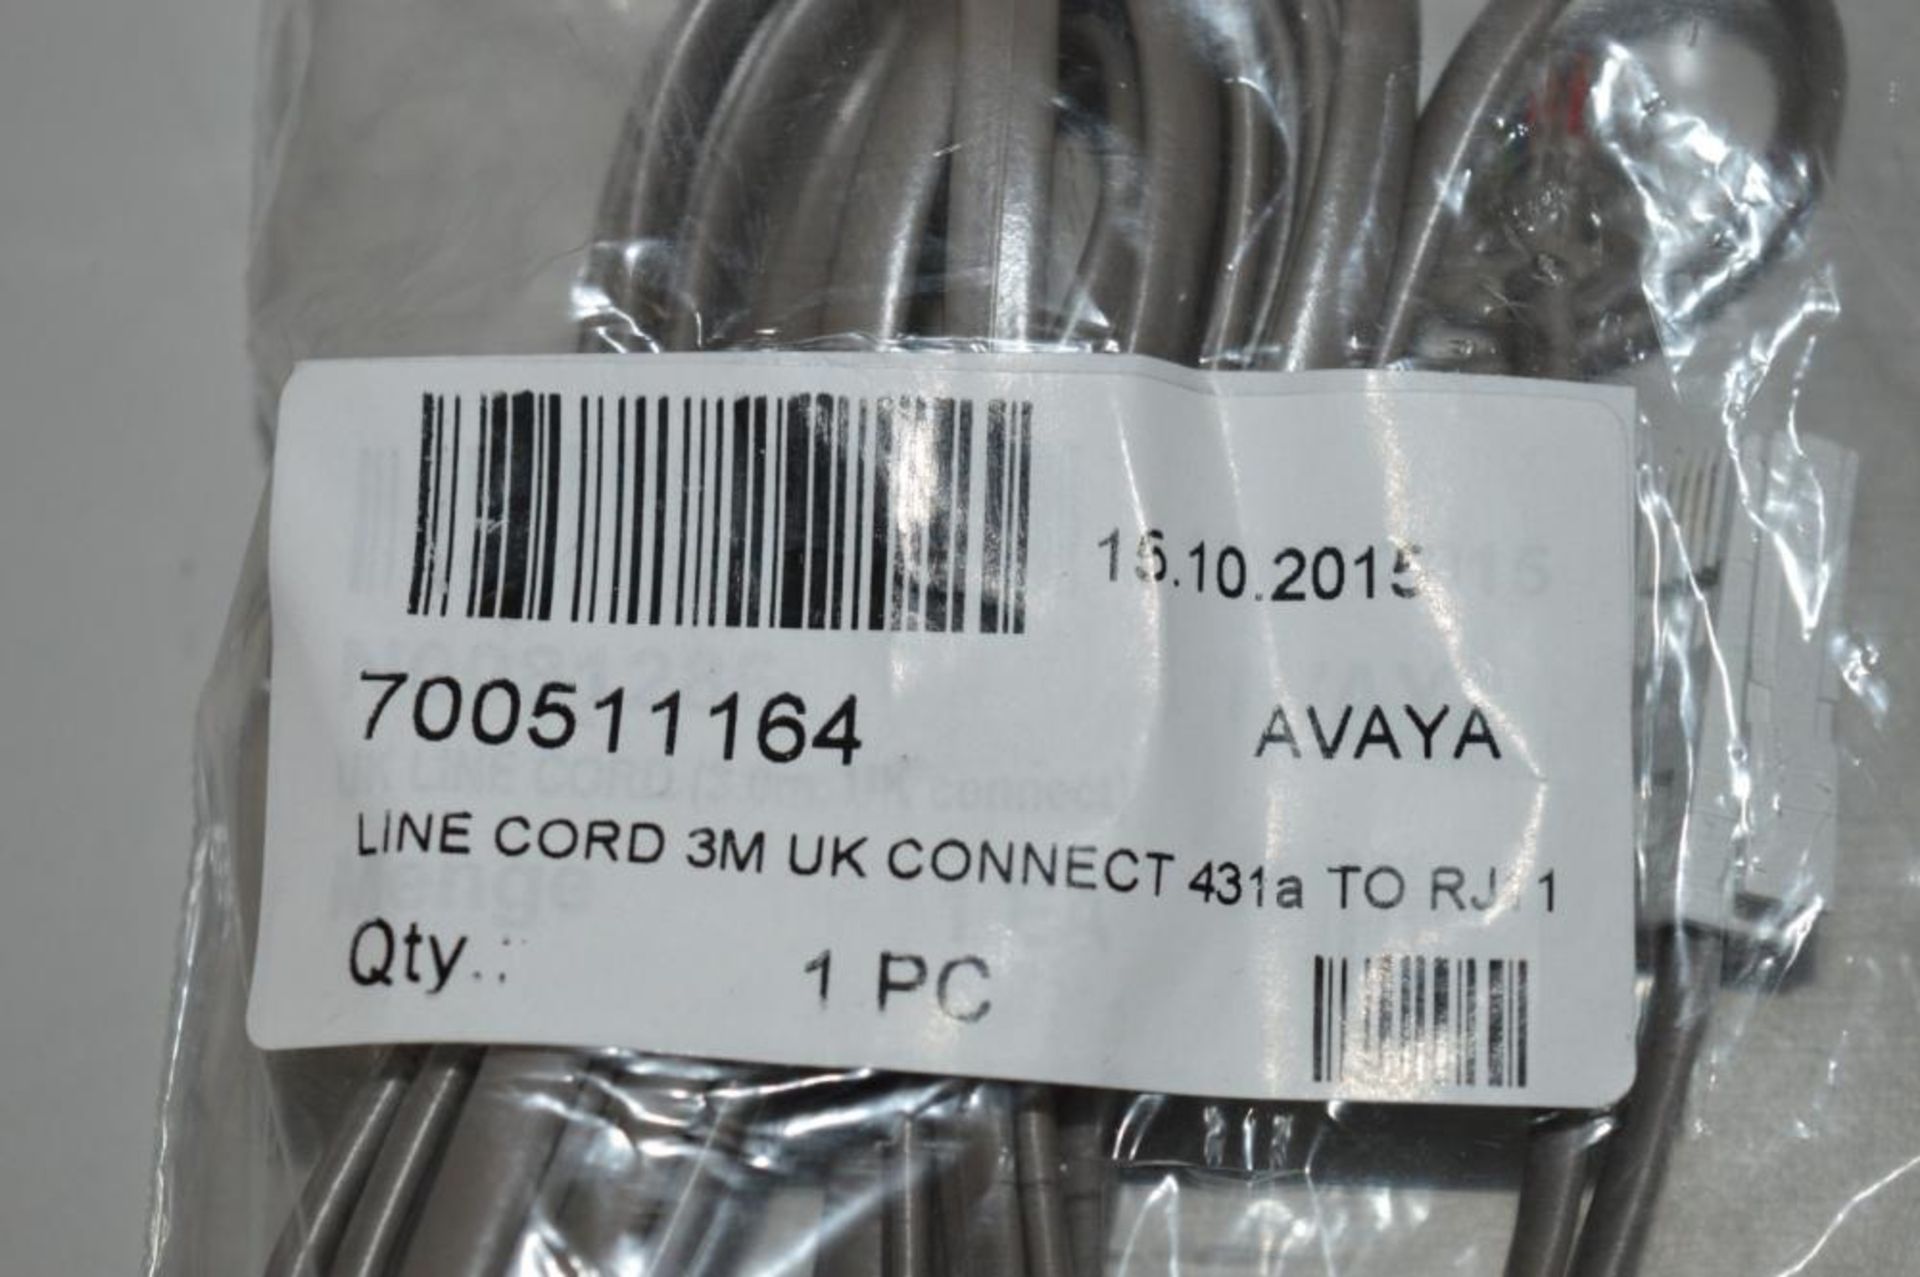 44 x Avaya Line Cord 3m UK Connect Telephone Cables - 41A to RJ11 - Brand New Stock - CL249 - Locati - Image 2 of 3